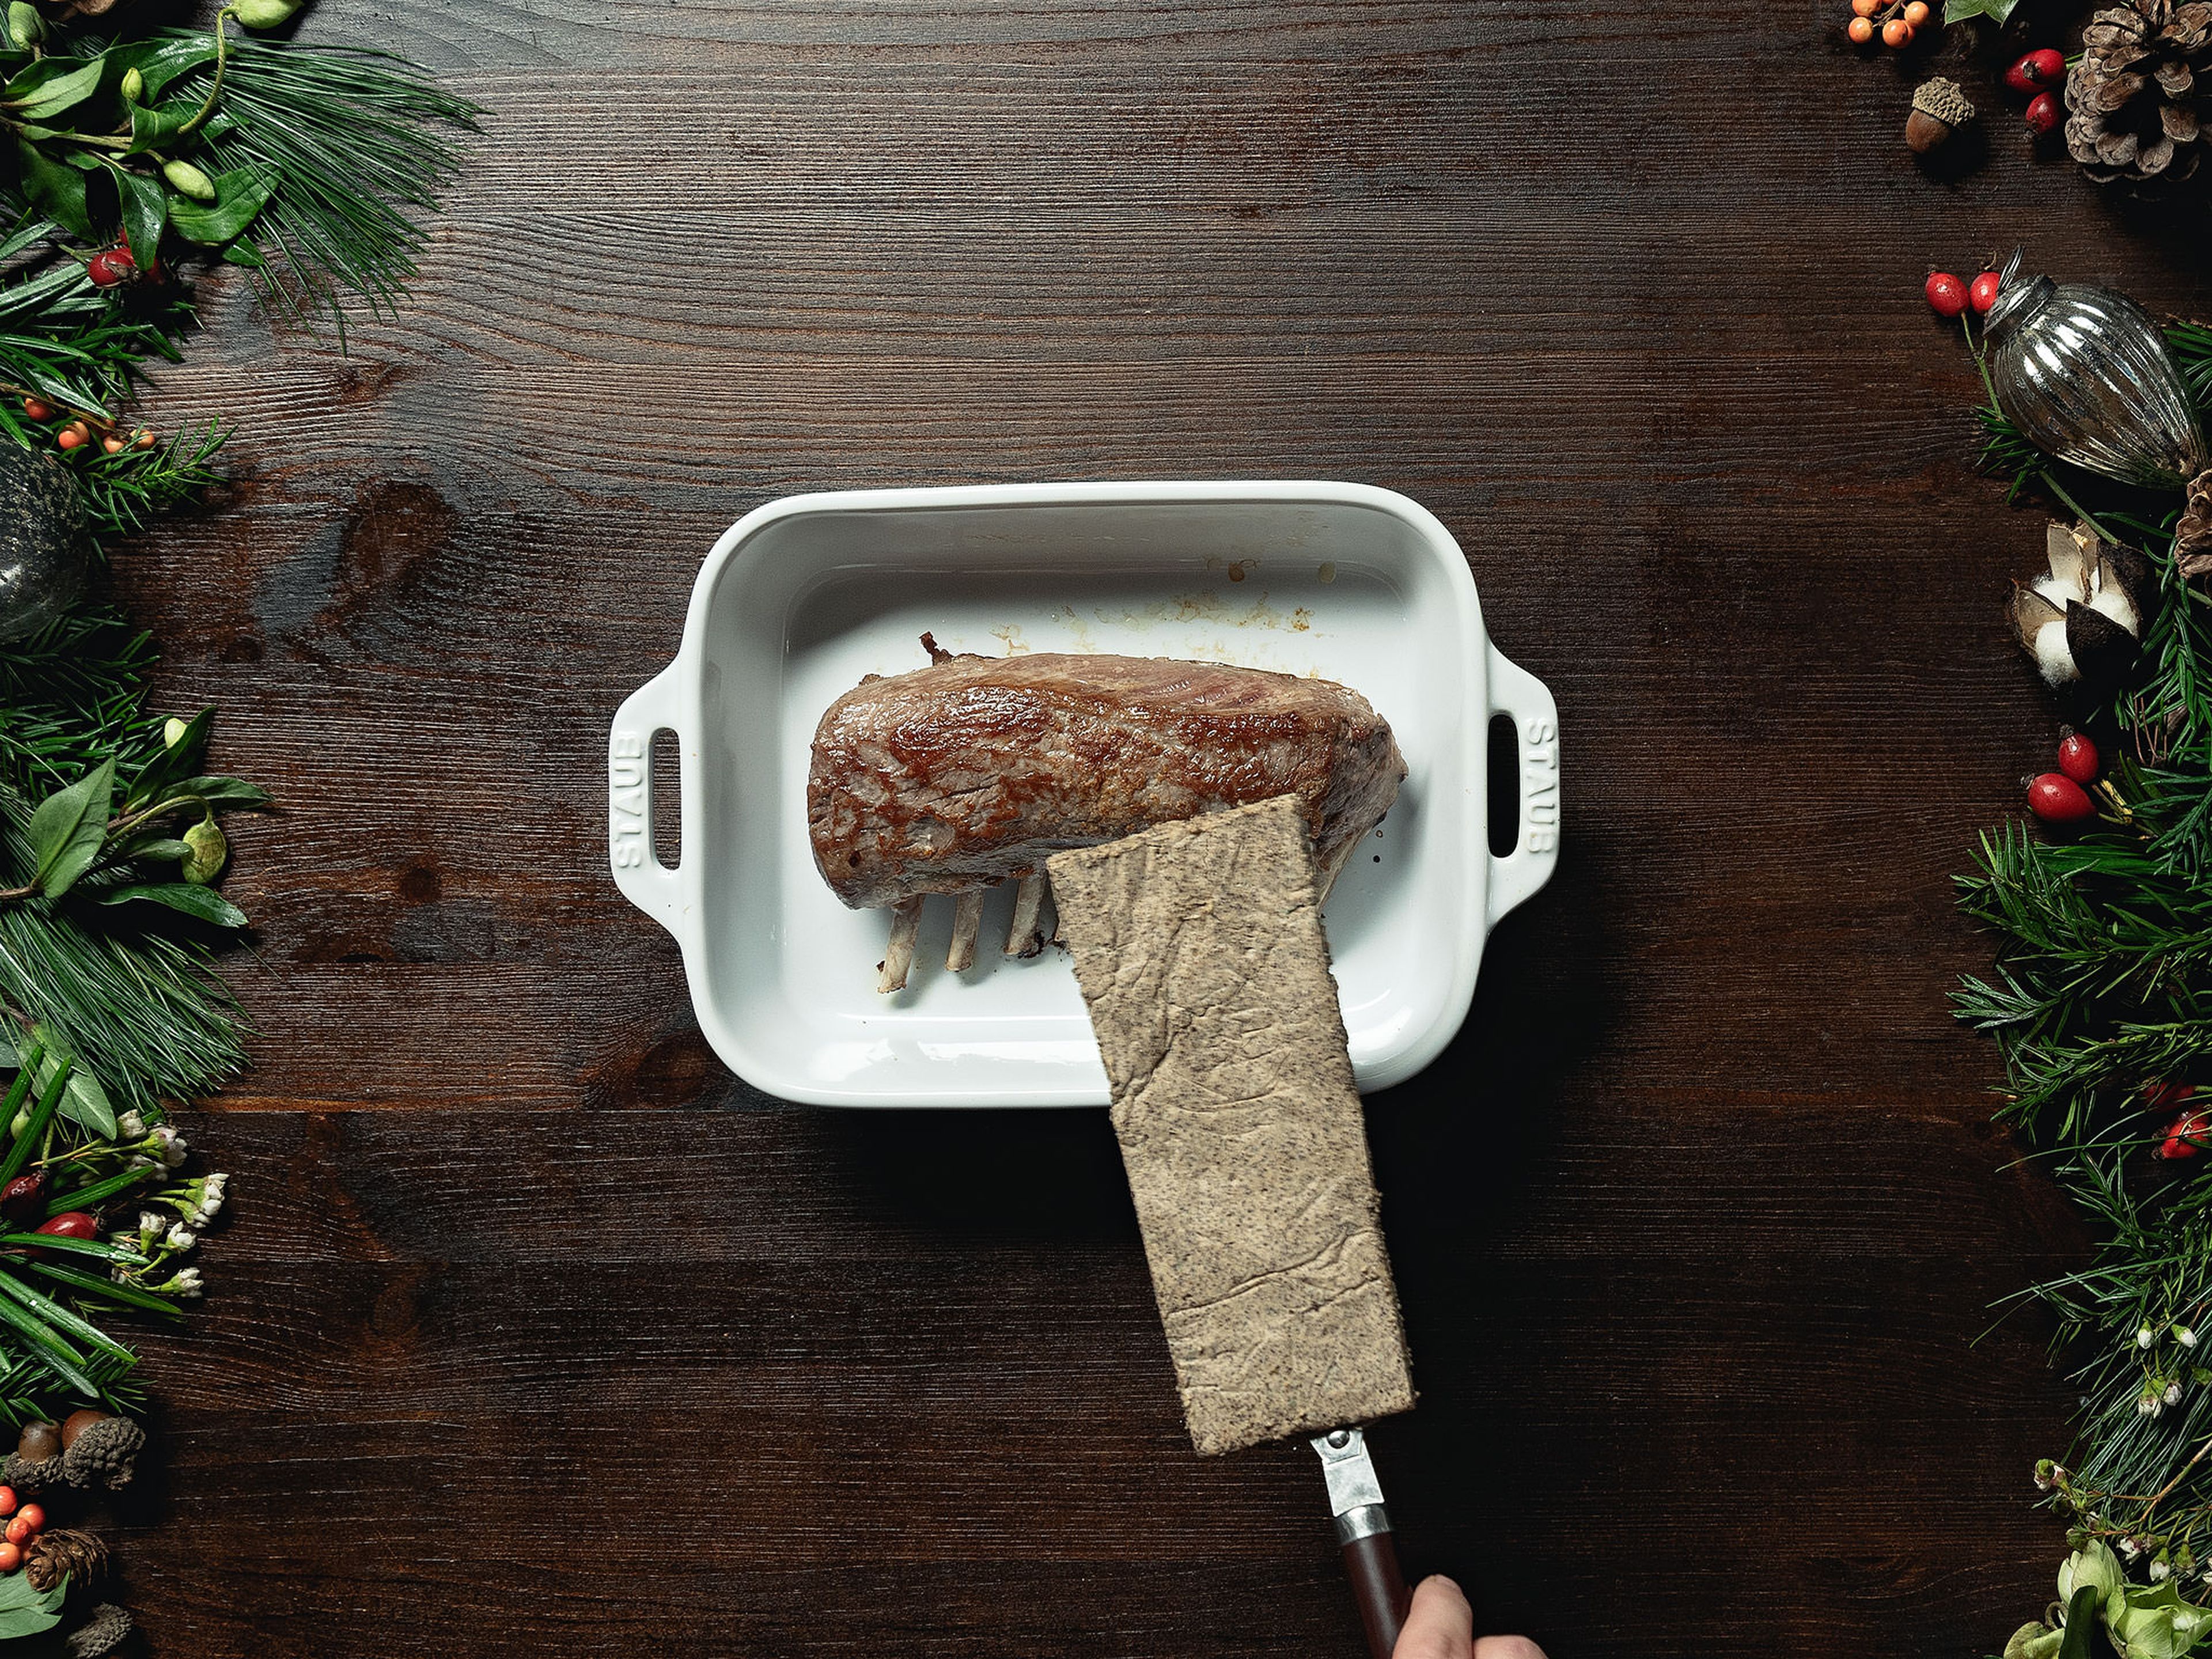 Cut the coffee crust to fit the rack of lamb and gently set onto the meat. Broil lamb on the highest grill function of the oven until the crust is set, approx. 3 min.